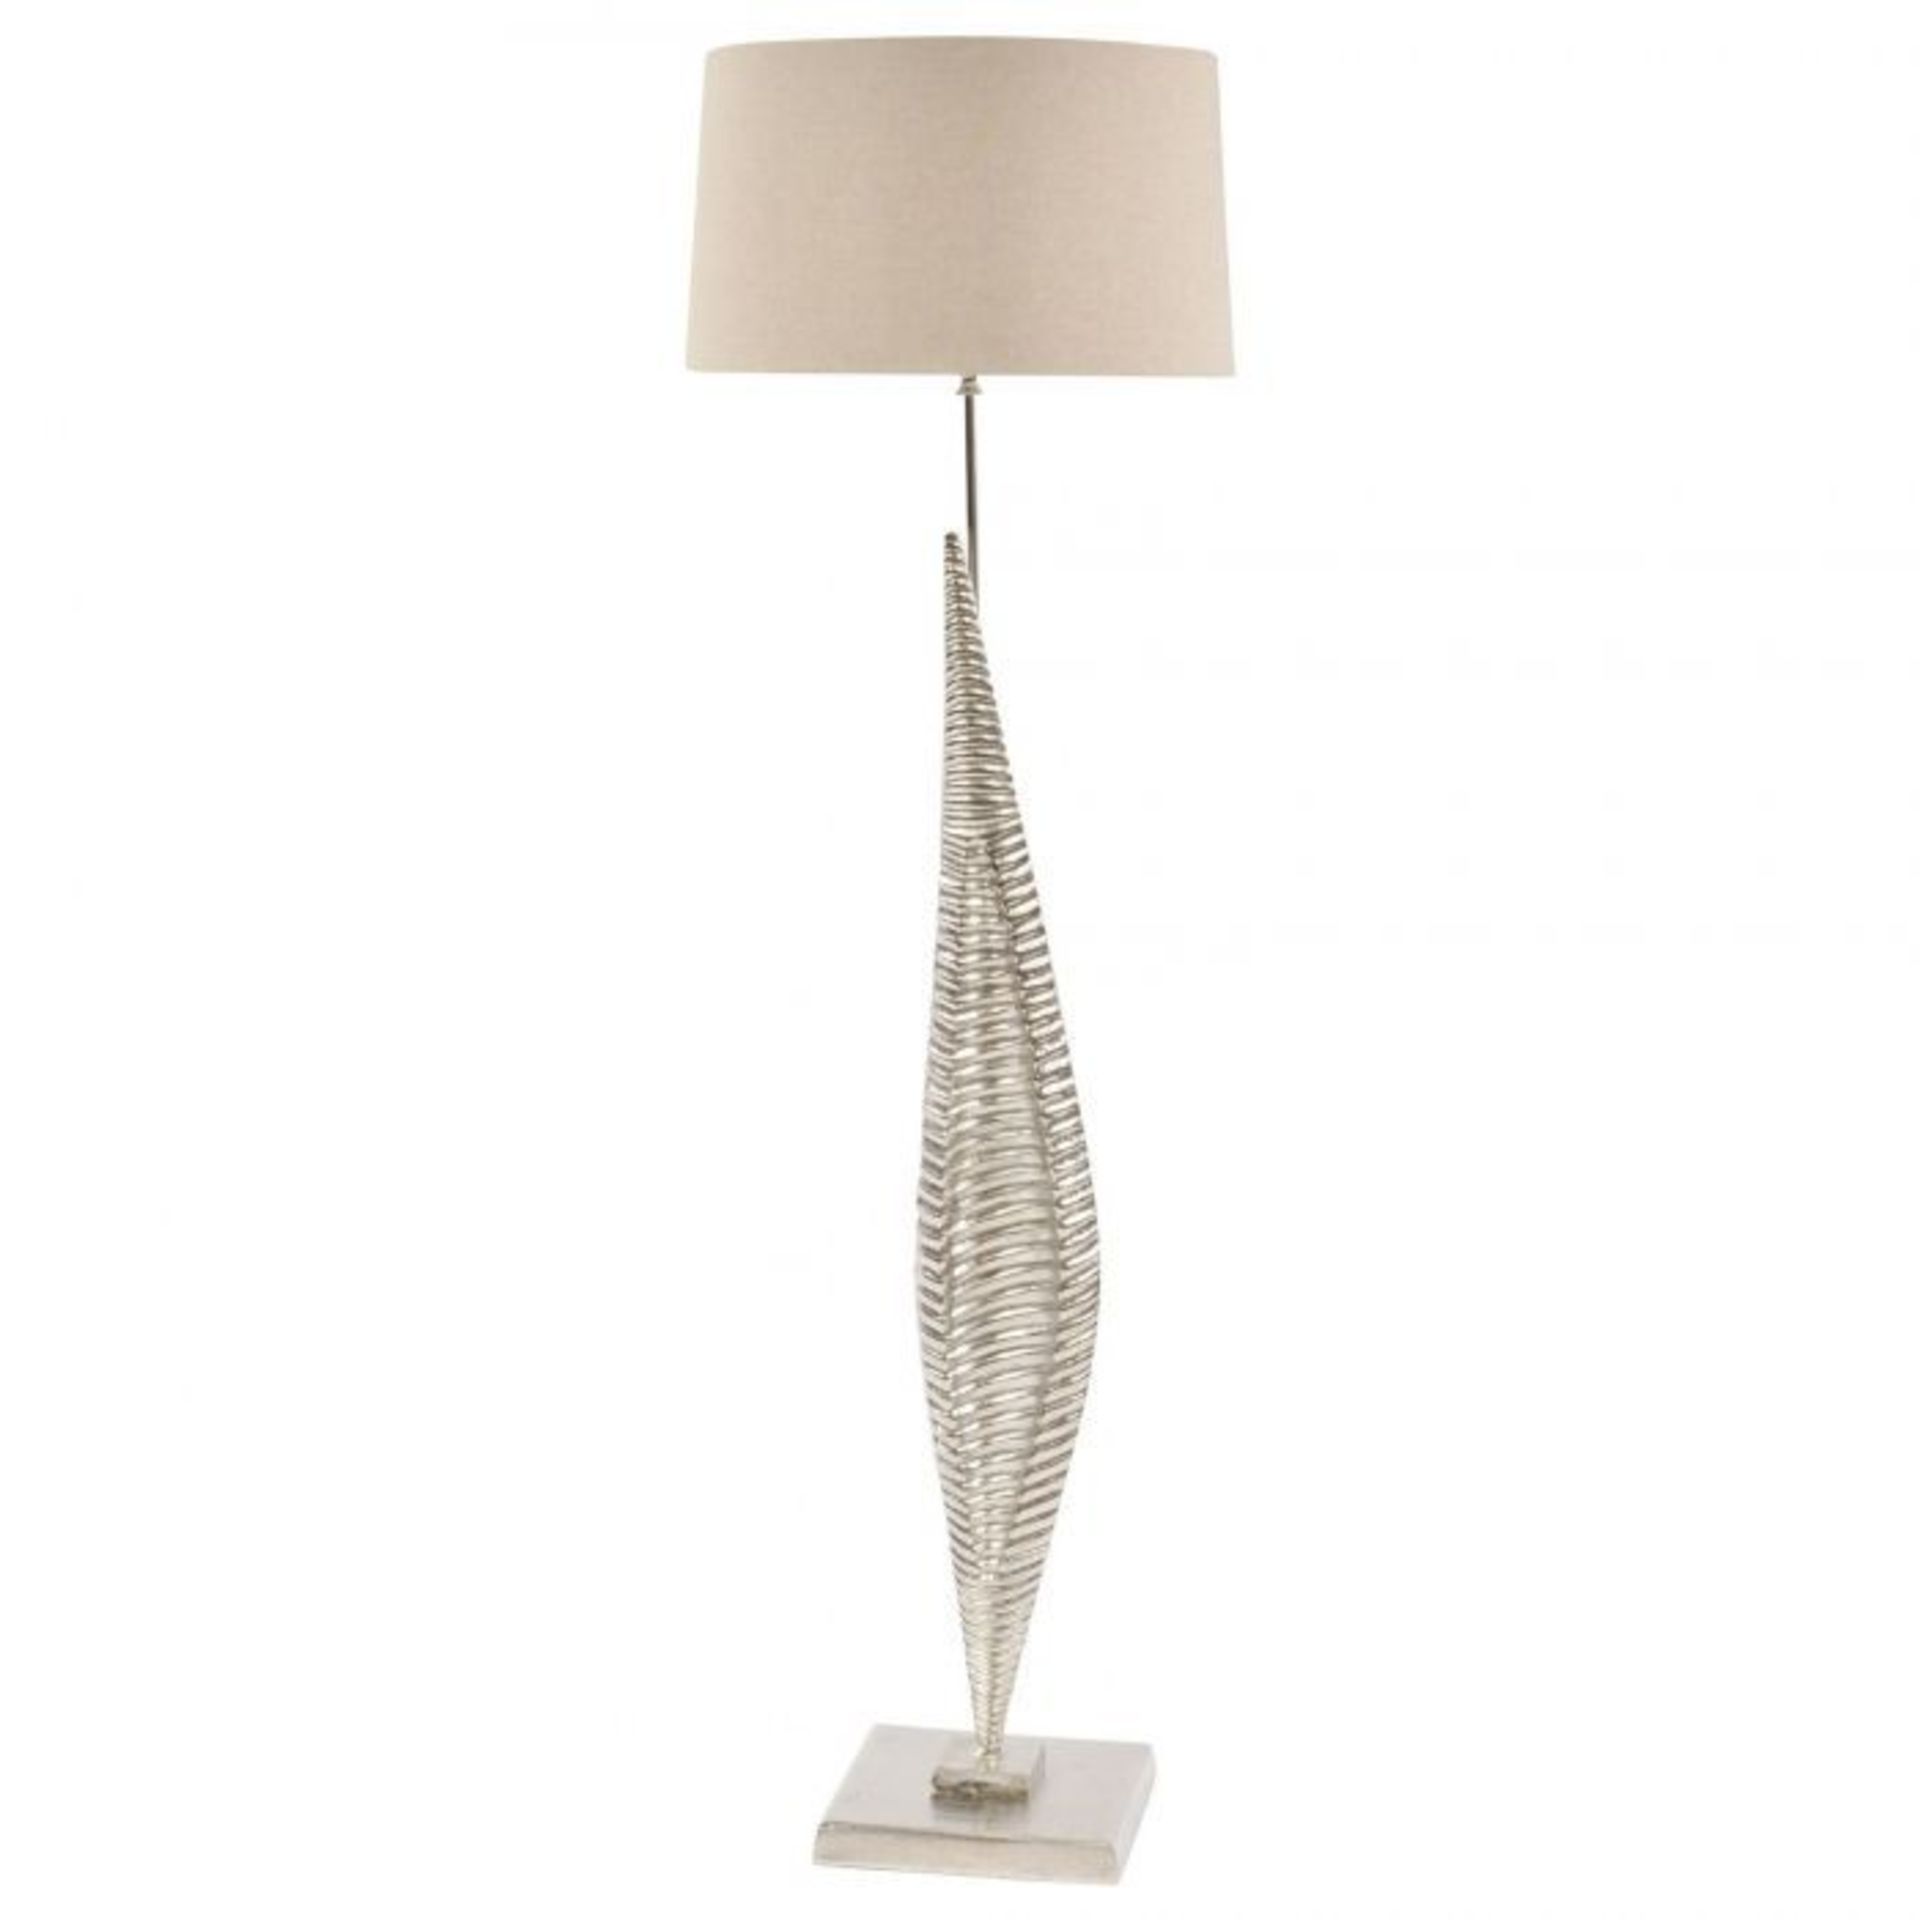 Set of 2 Scalene Ribbed Floor Lamp Cotton Shades (BEIGE) (44cm) (SHADE ONLY NO BASE INCLUDED) (461/1